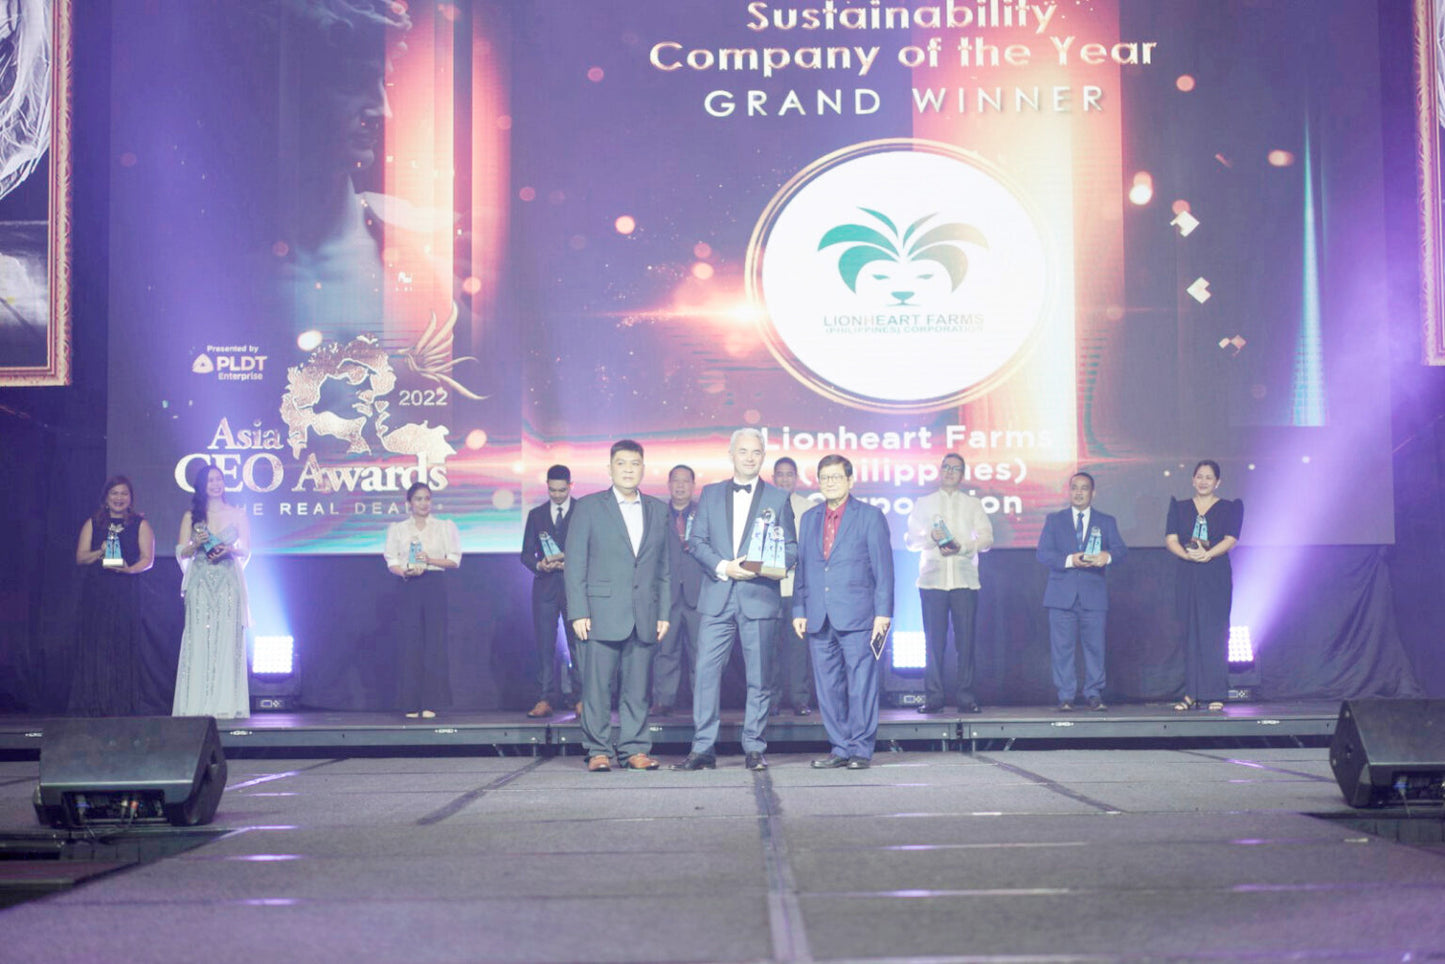 Lionheart Farms wins ‘Sustainability Company of the Year’ at Asia CEO Awards 2022